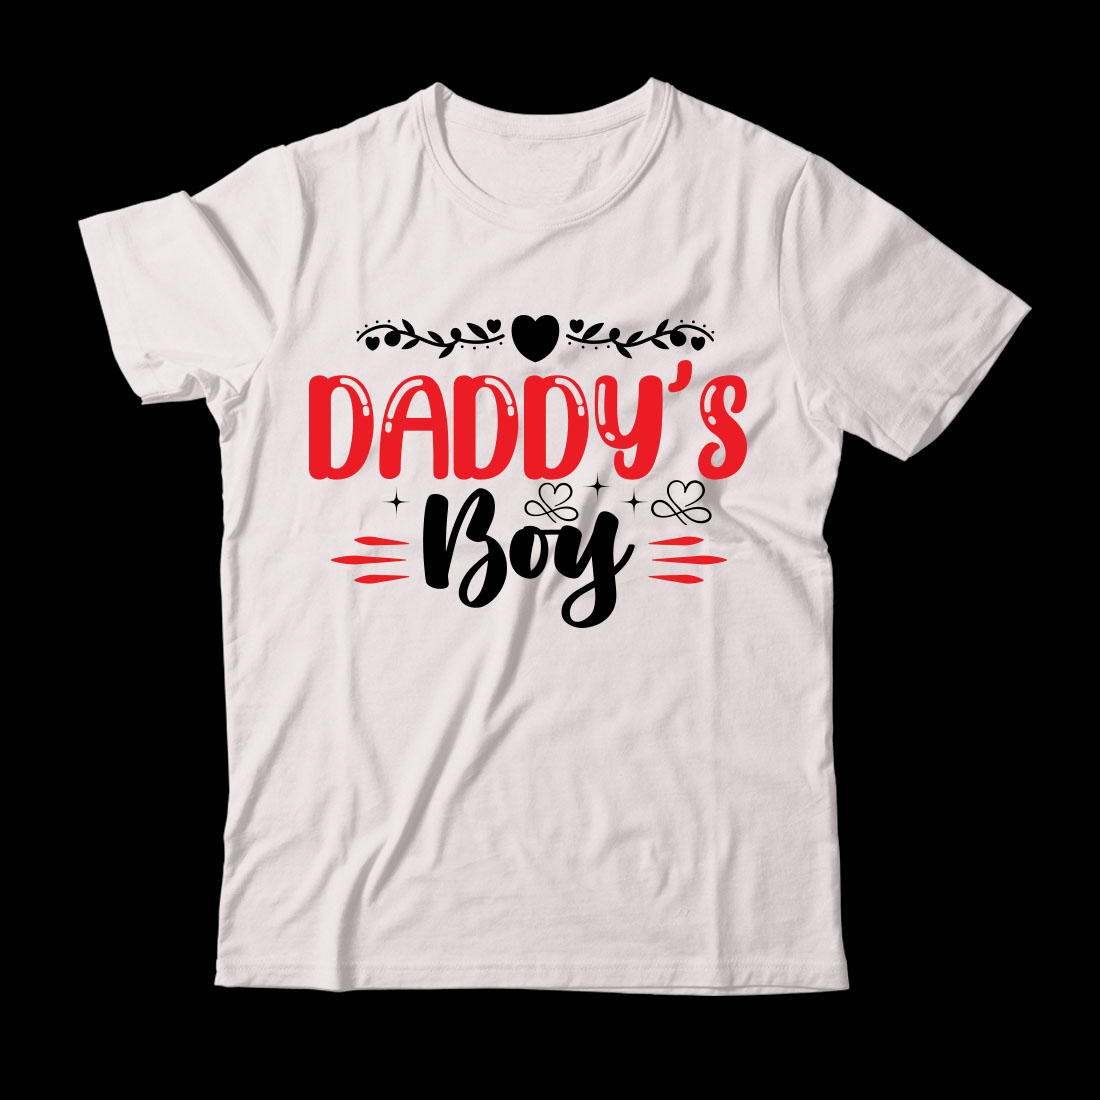 White t - shirt that says daddy's boy.